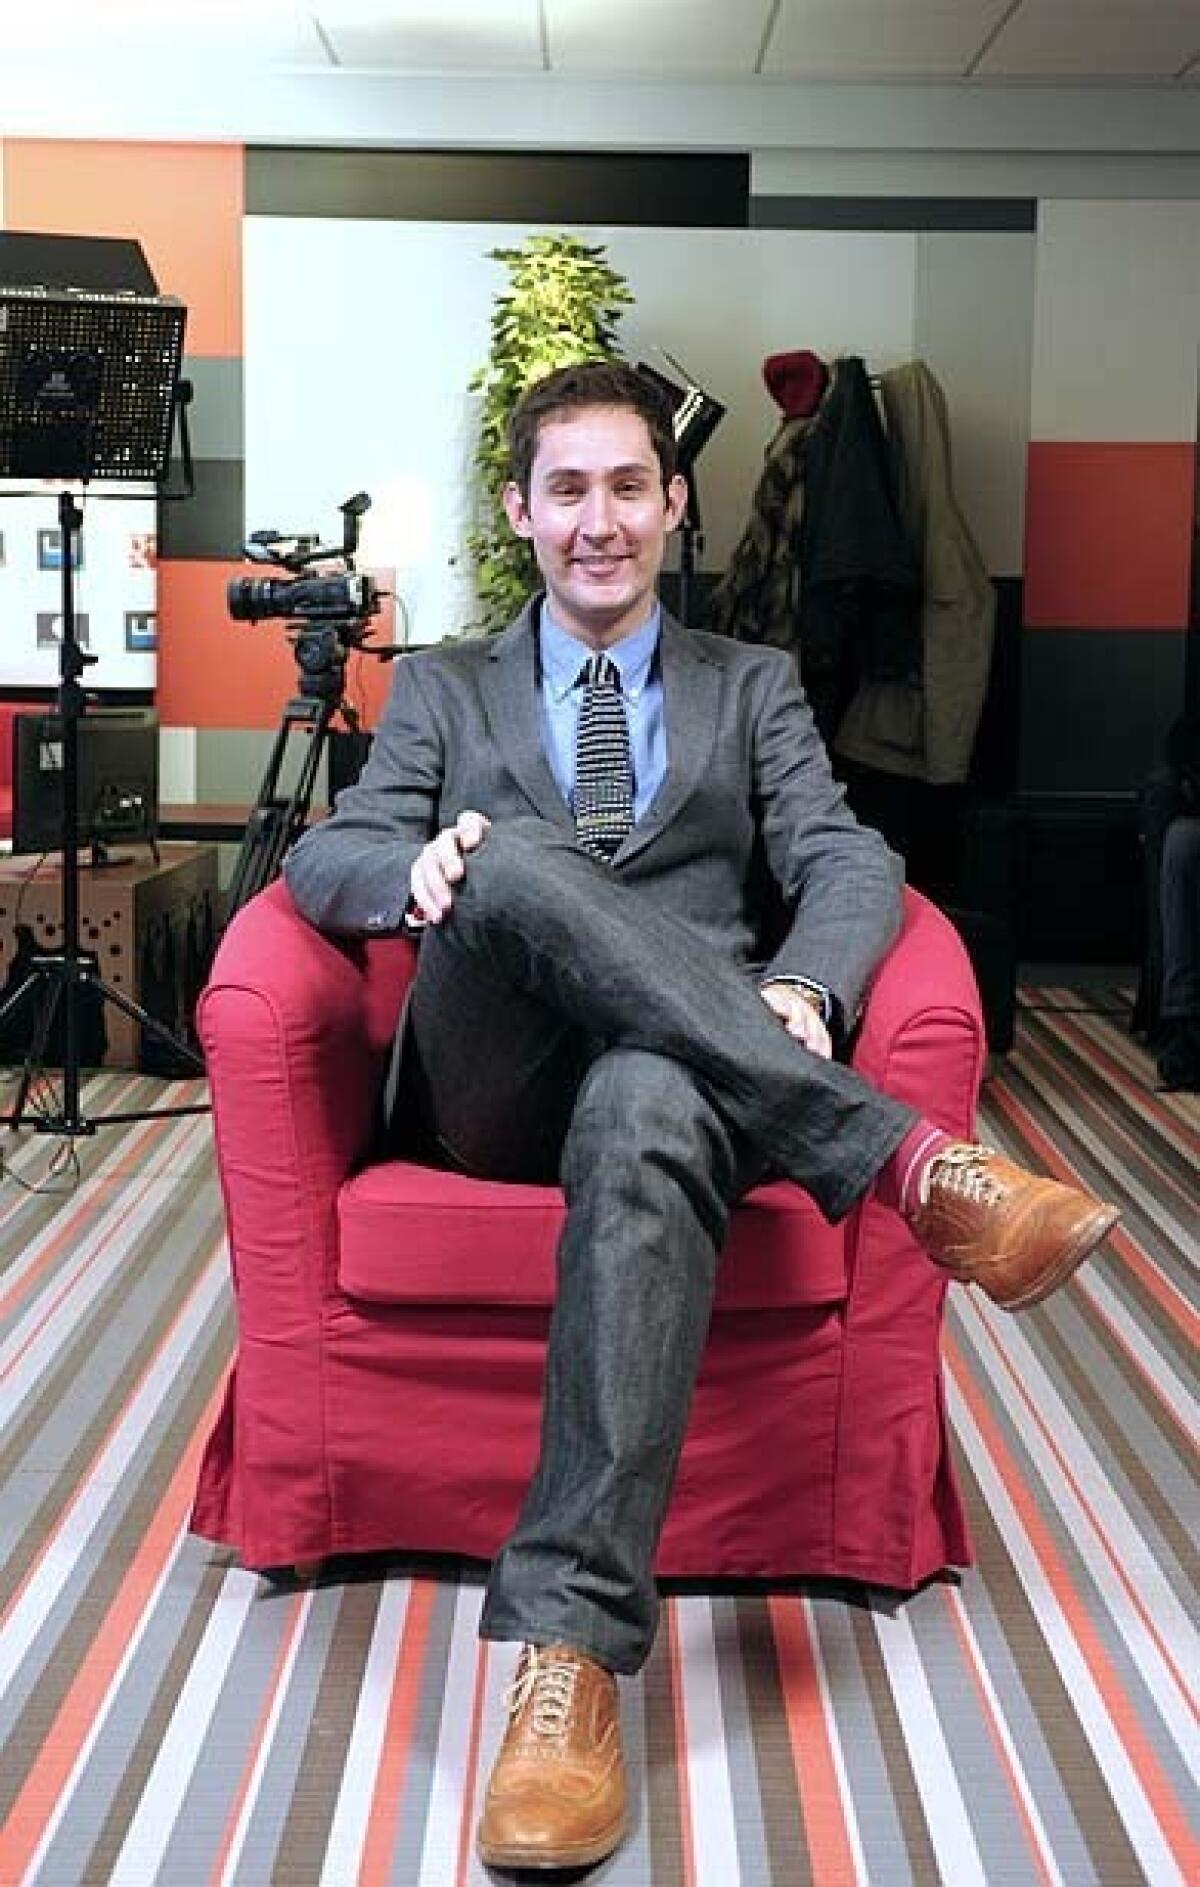 Instagram co-founder Kevin Systrom: "If you delight people even a little bit with a simple solution, it turns out it goes very far."